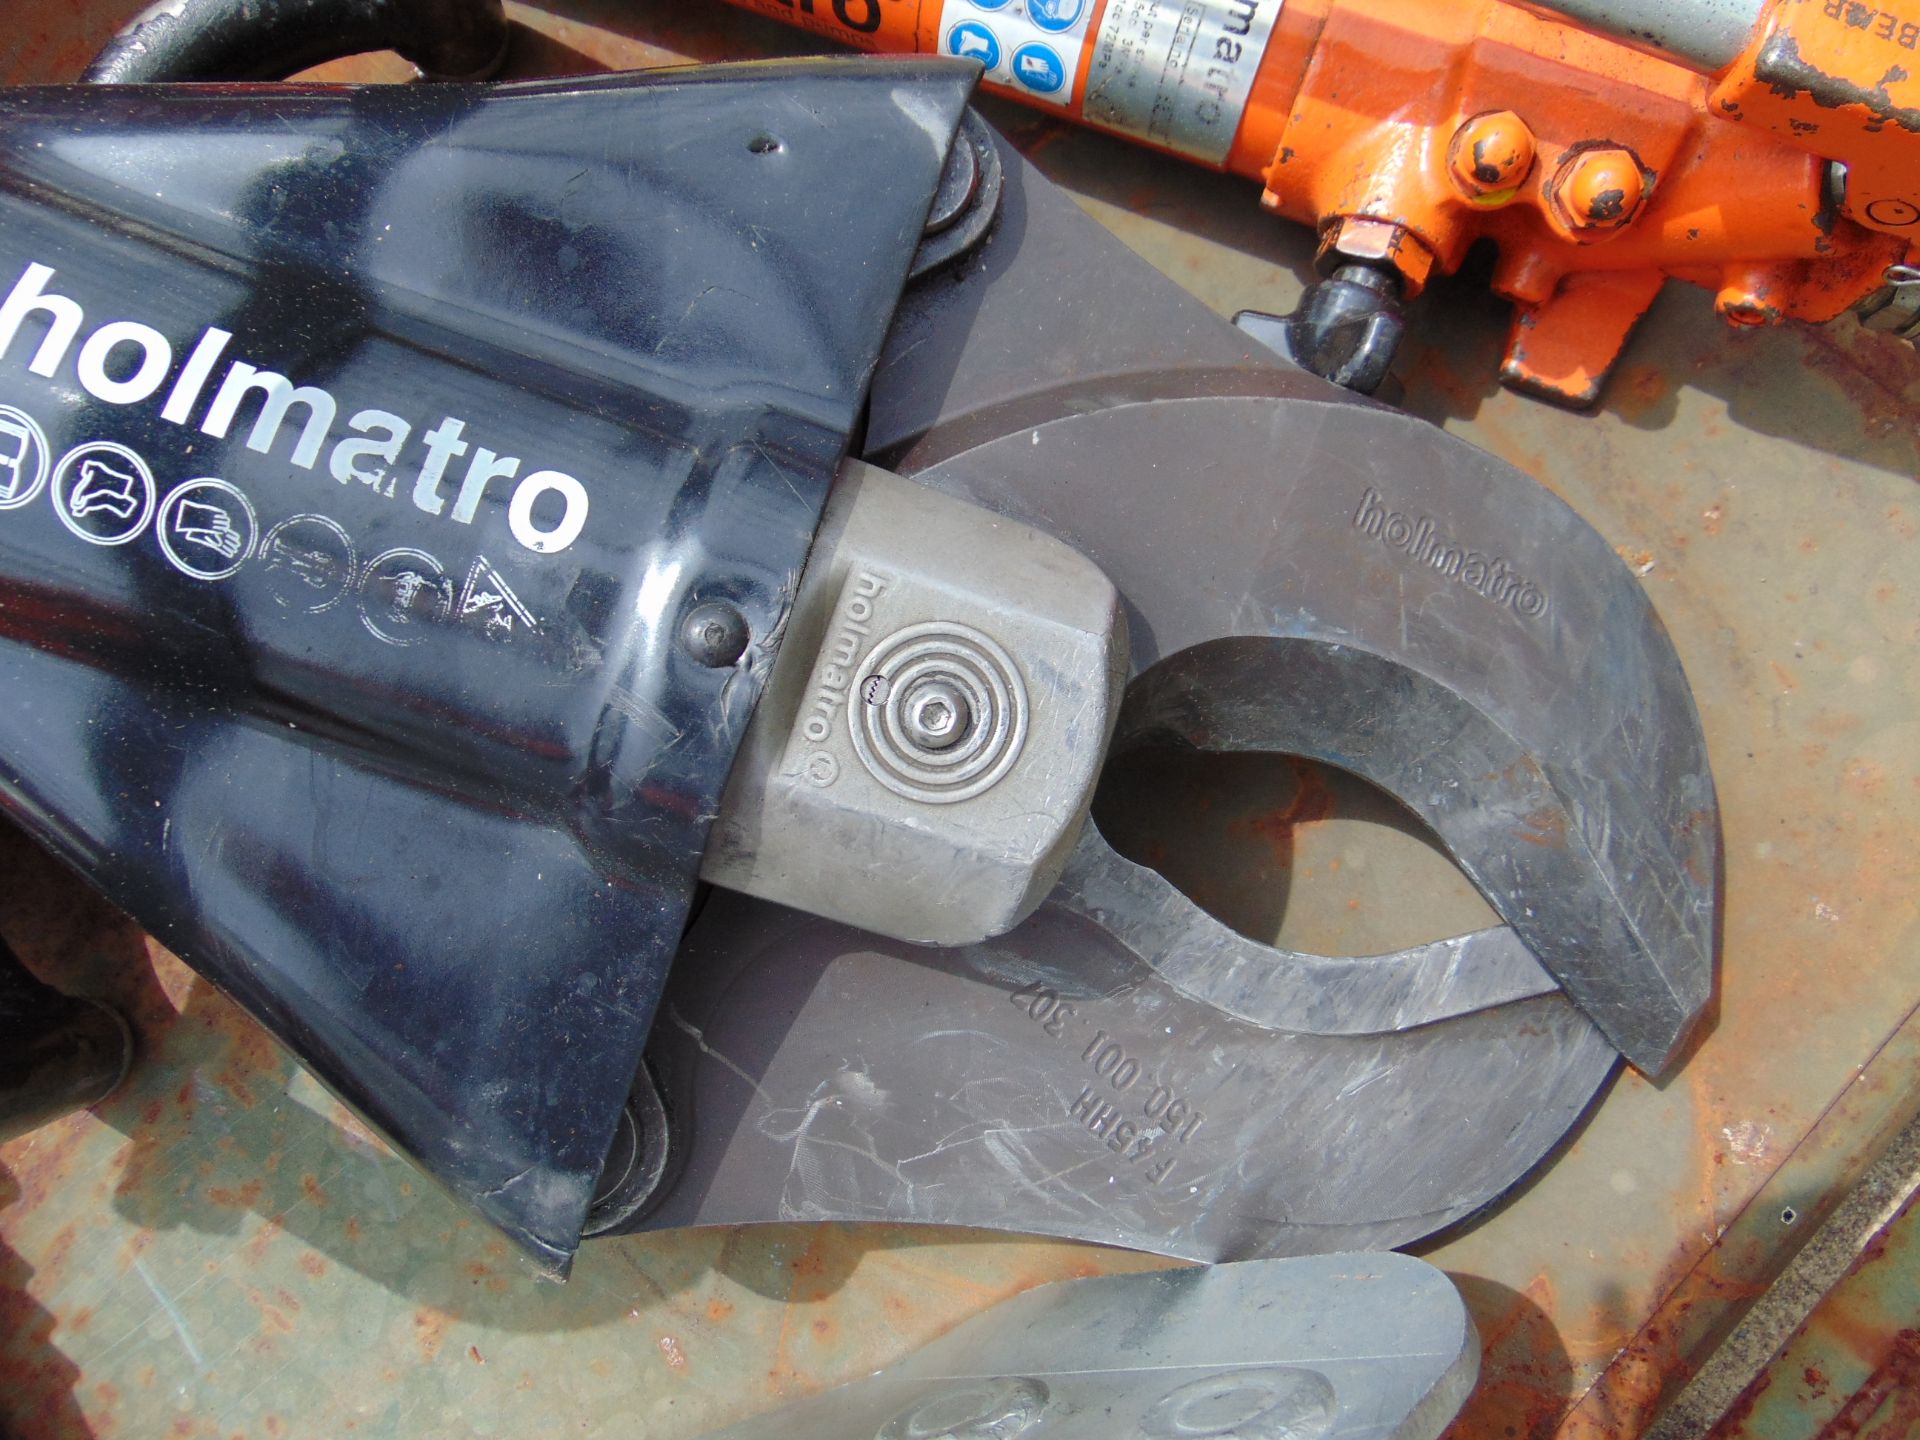 Holmatro Jaws of Life Rescue Kit inc Power Pack, Cutters, Spreaders, Ram etc - Image 5 of 18